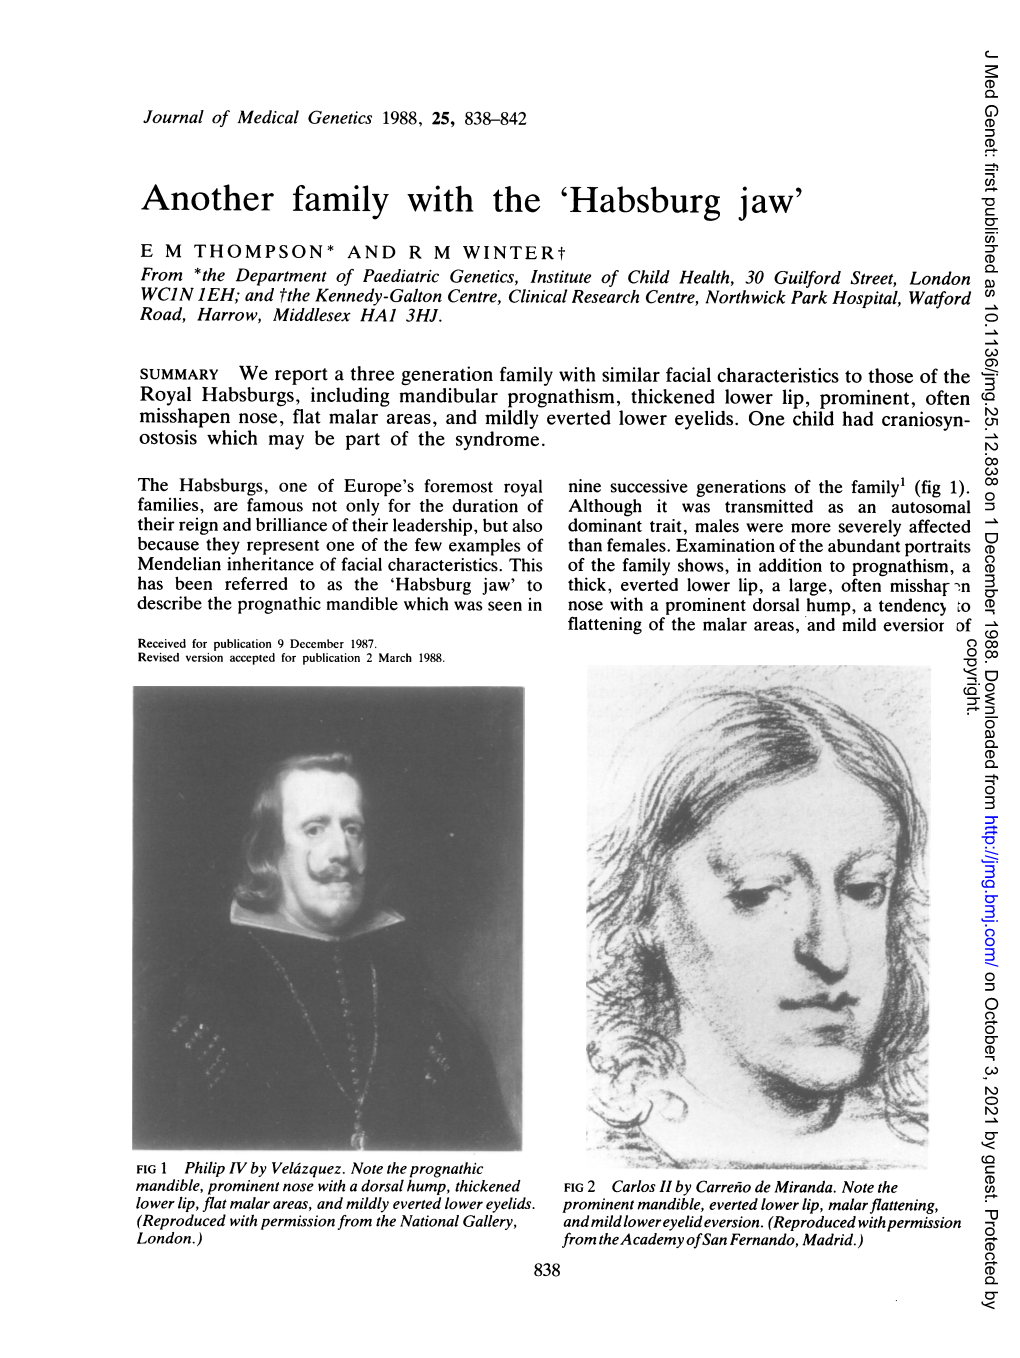 Another Family with the 'Habsburg Jaw'